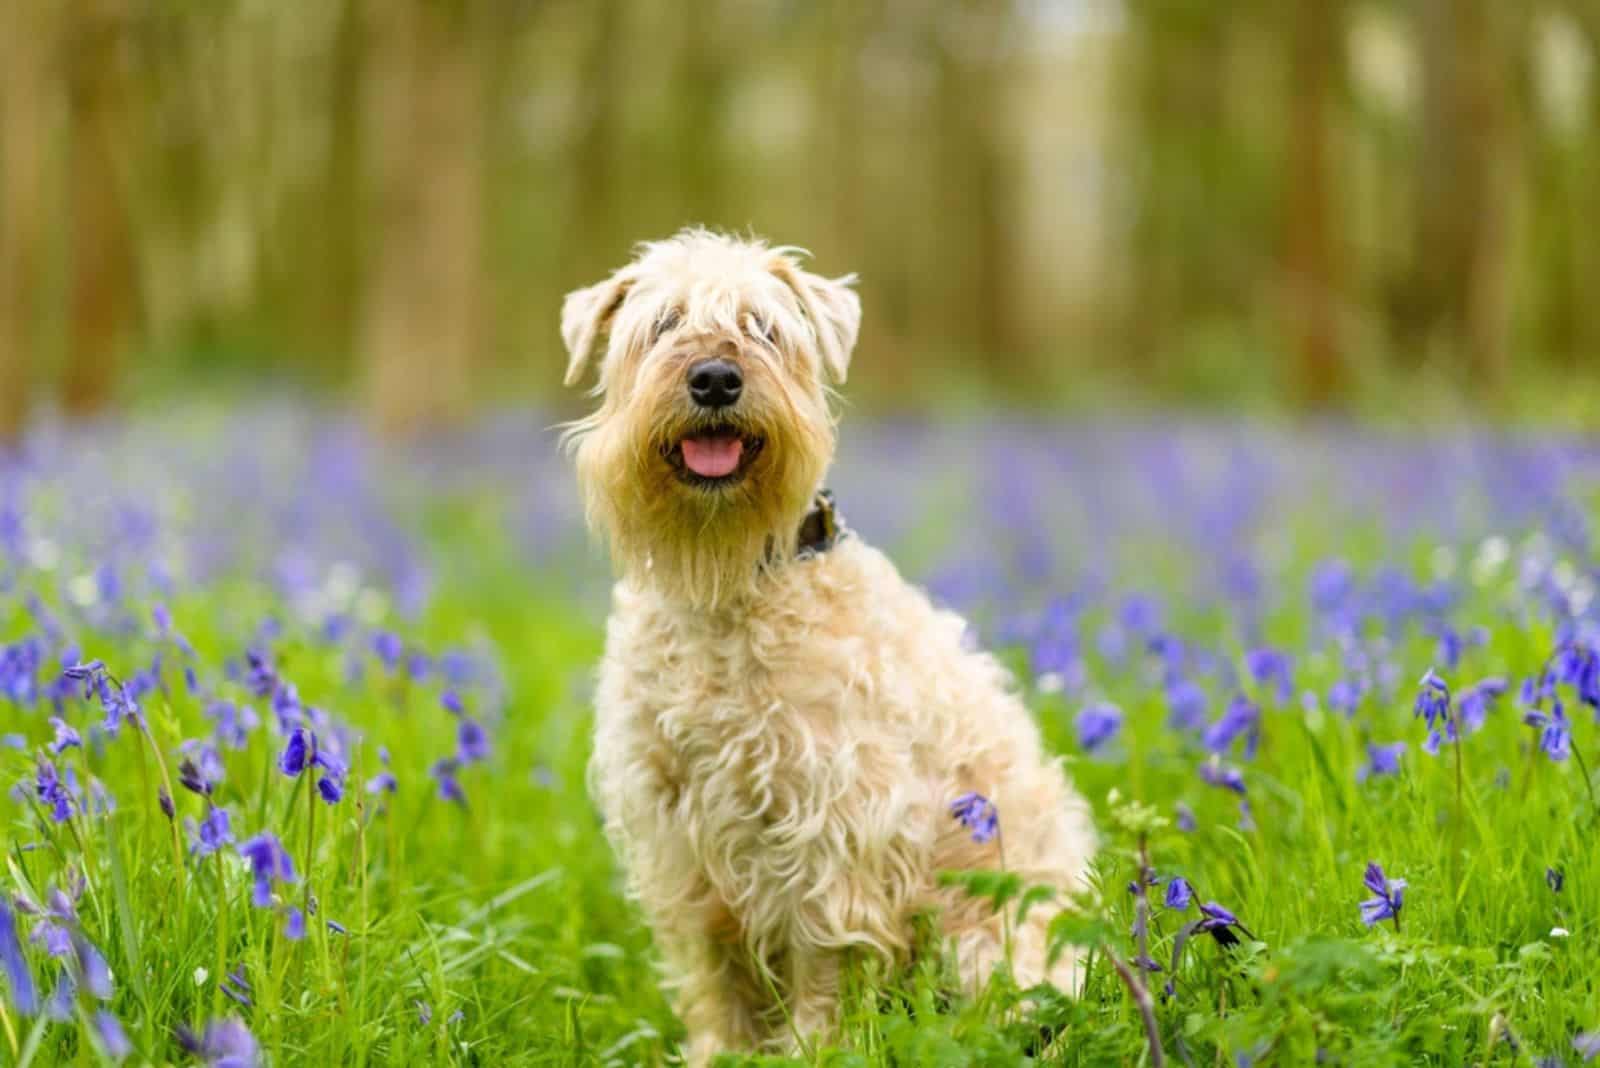 A Soft-coated Wheaten Terrier sitting in grassy ground